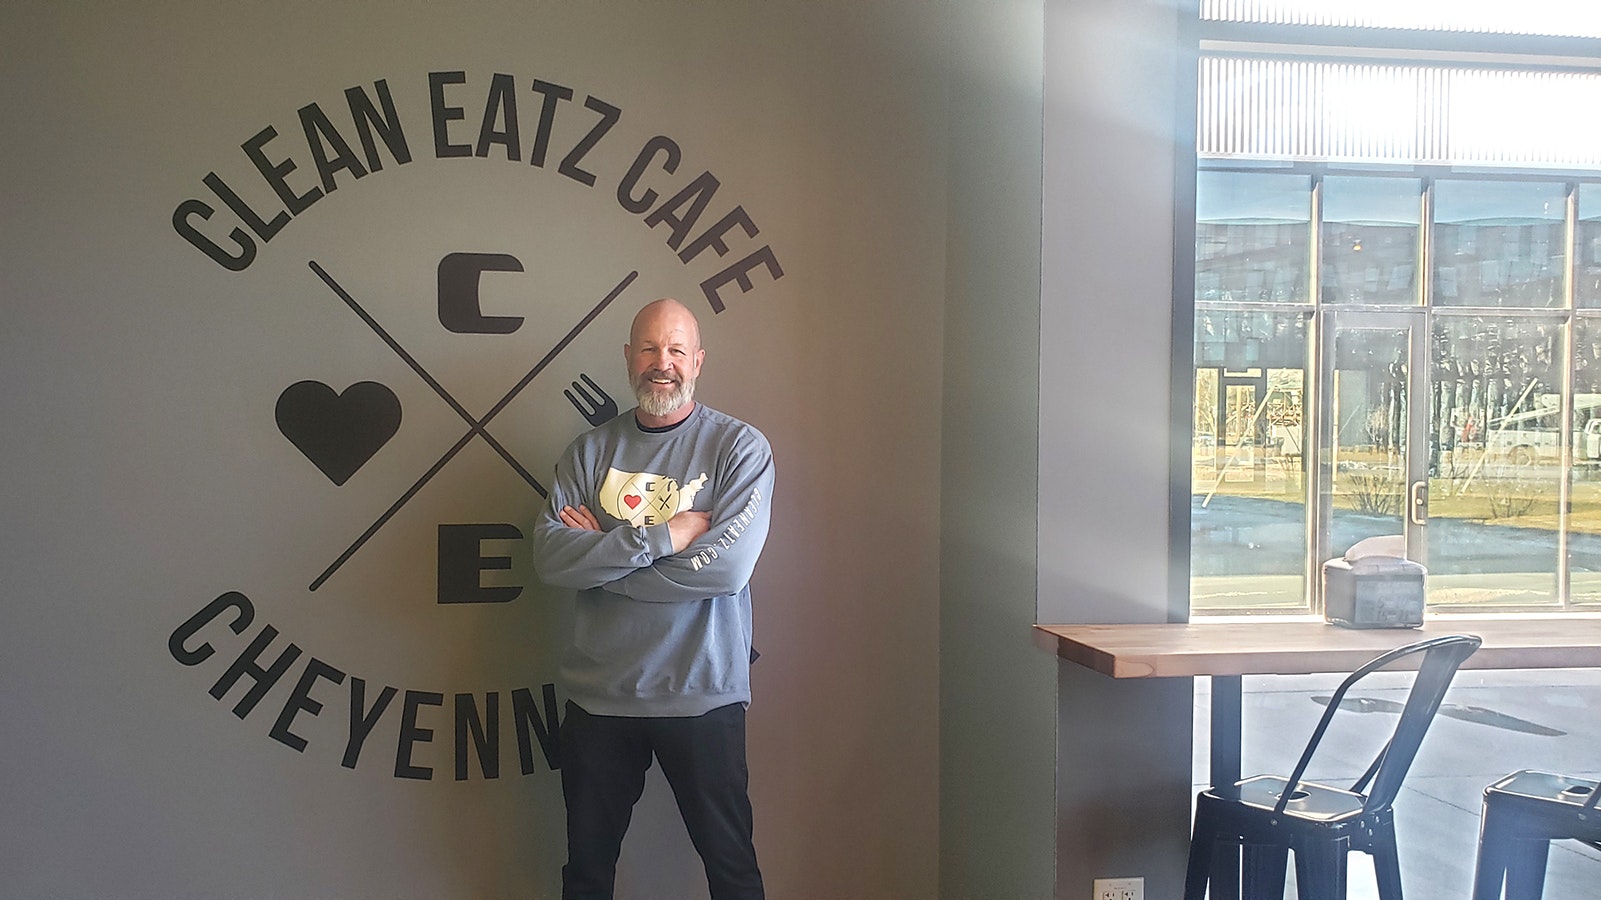 Gary Shaklee at his Clean Eatz franchise in Cheyenne.